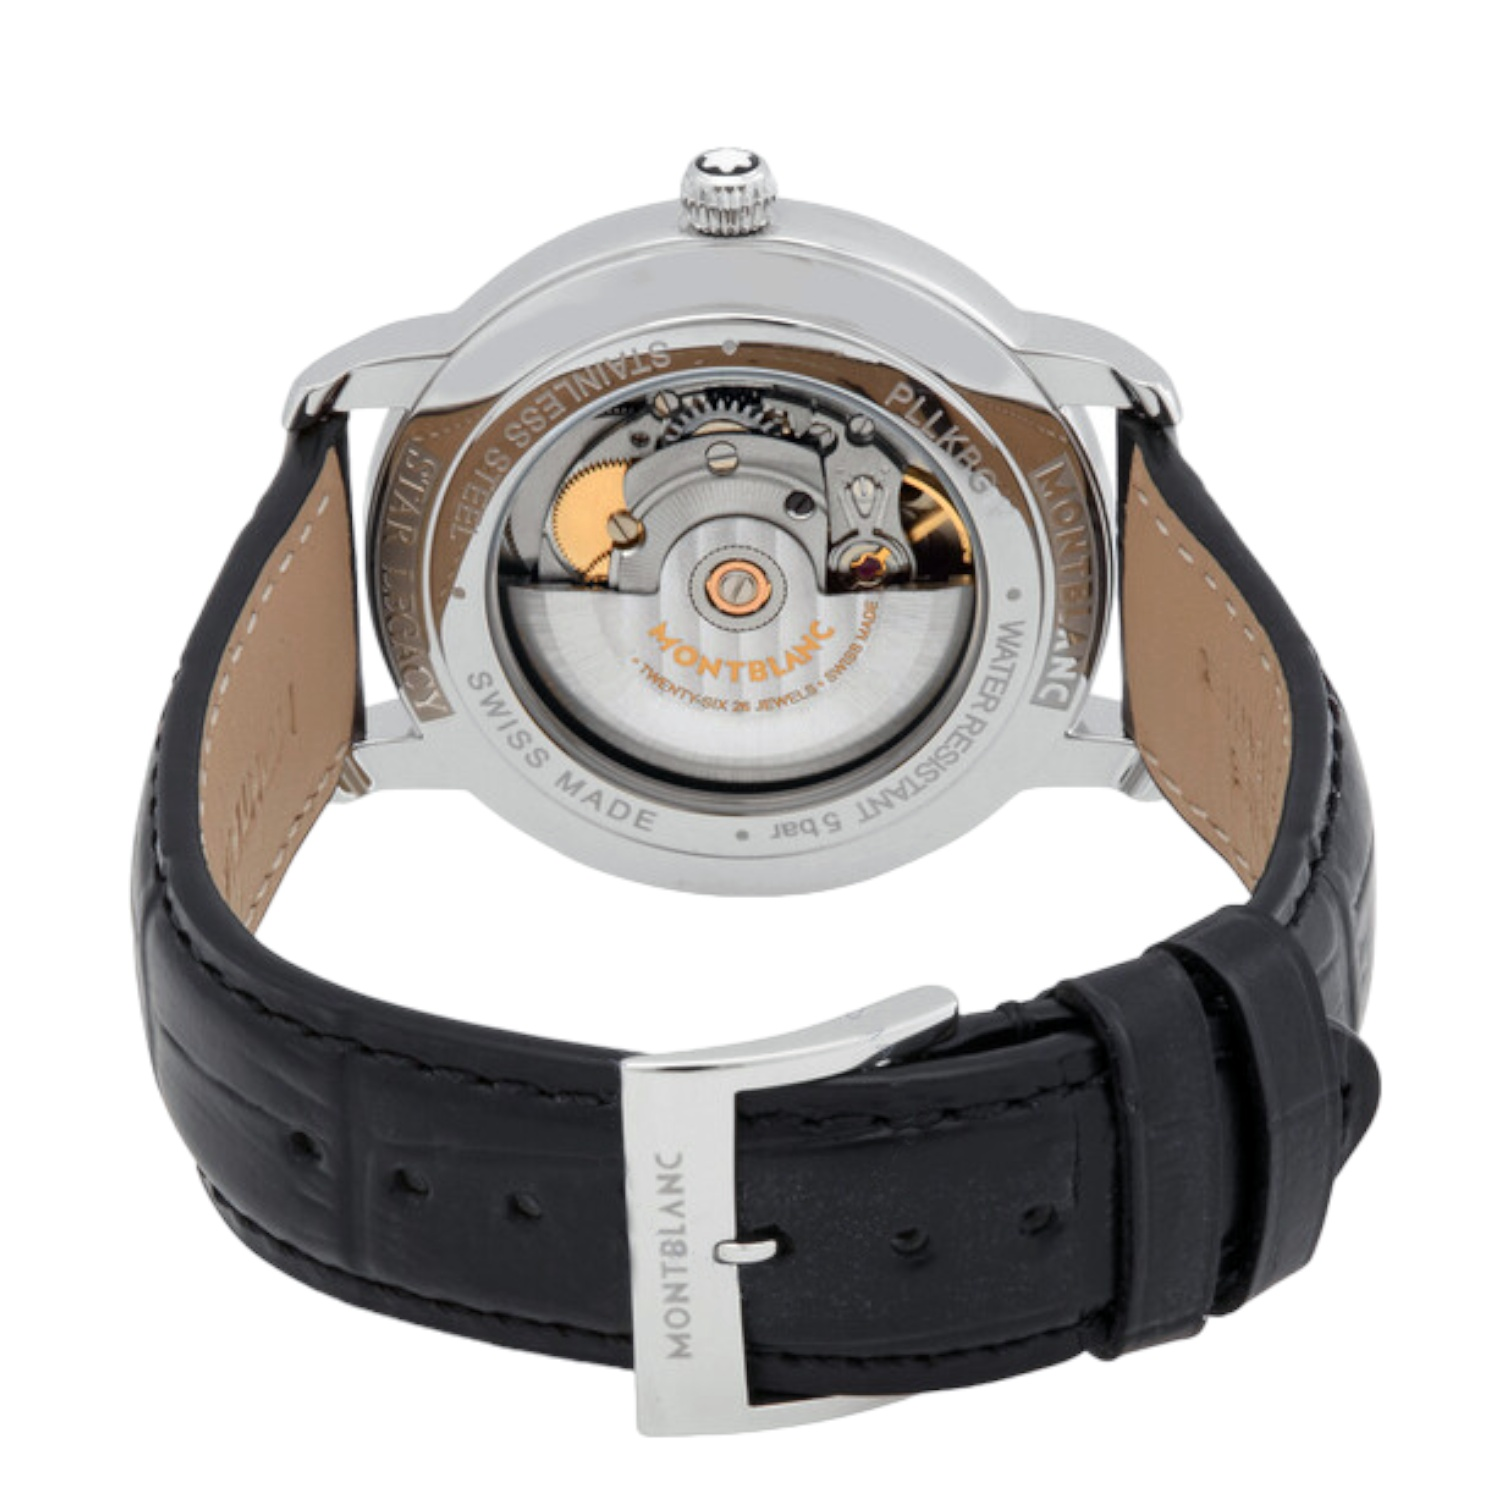 Montblanc Star Legacy Automatic Ref. 128686 - ON6247